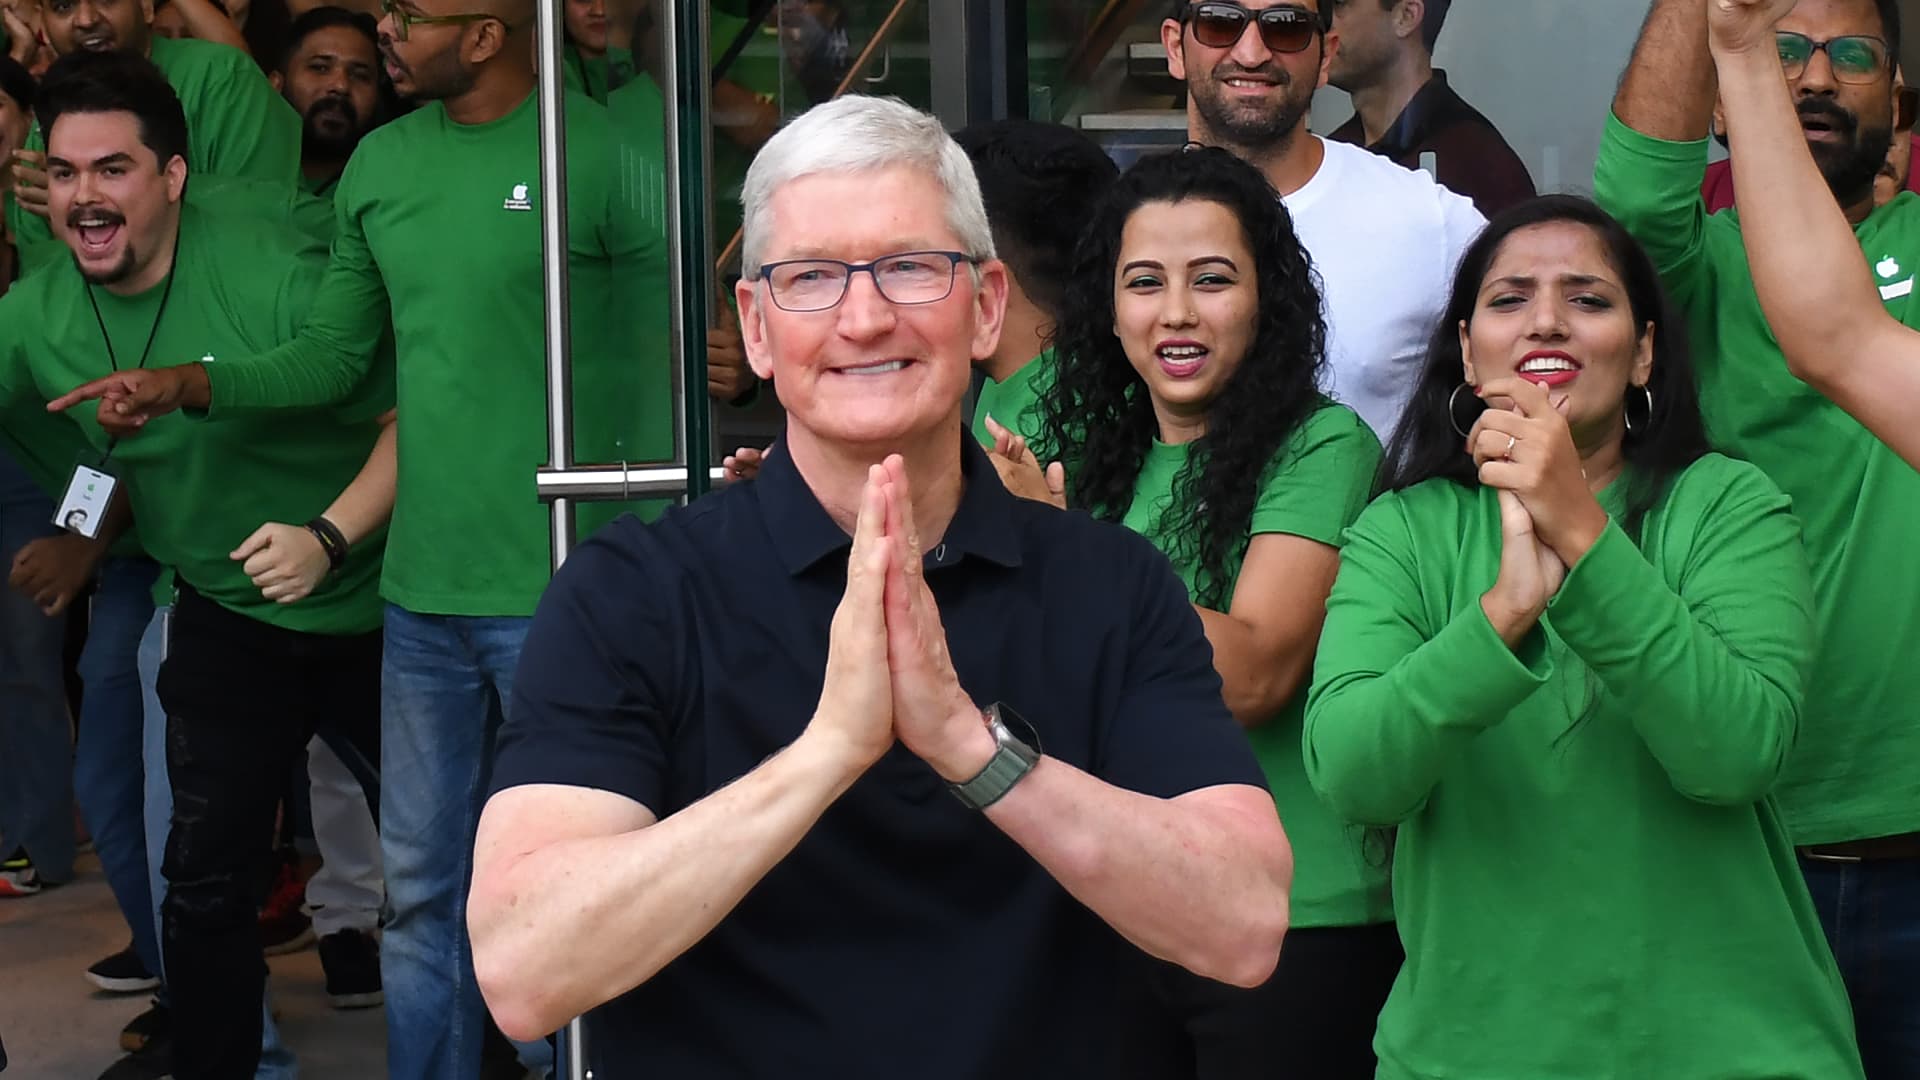 India is now one of Apple's top 5 iPhone markets for the first time